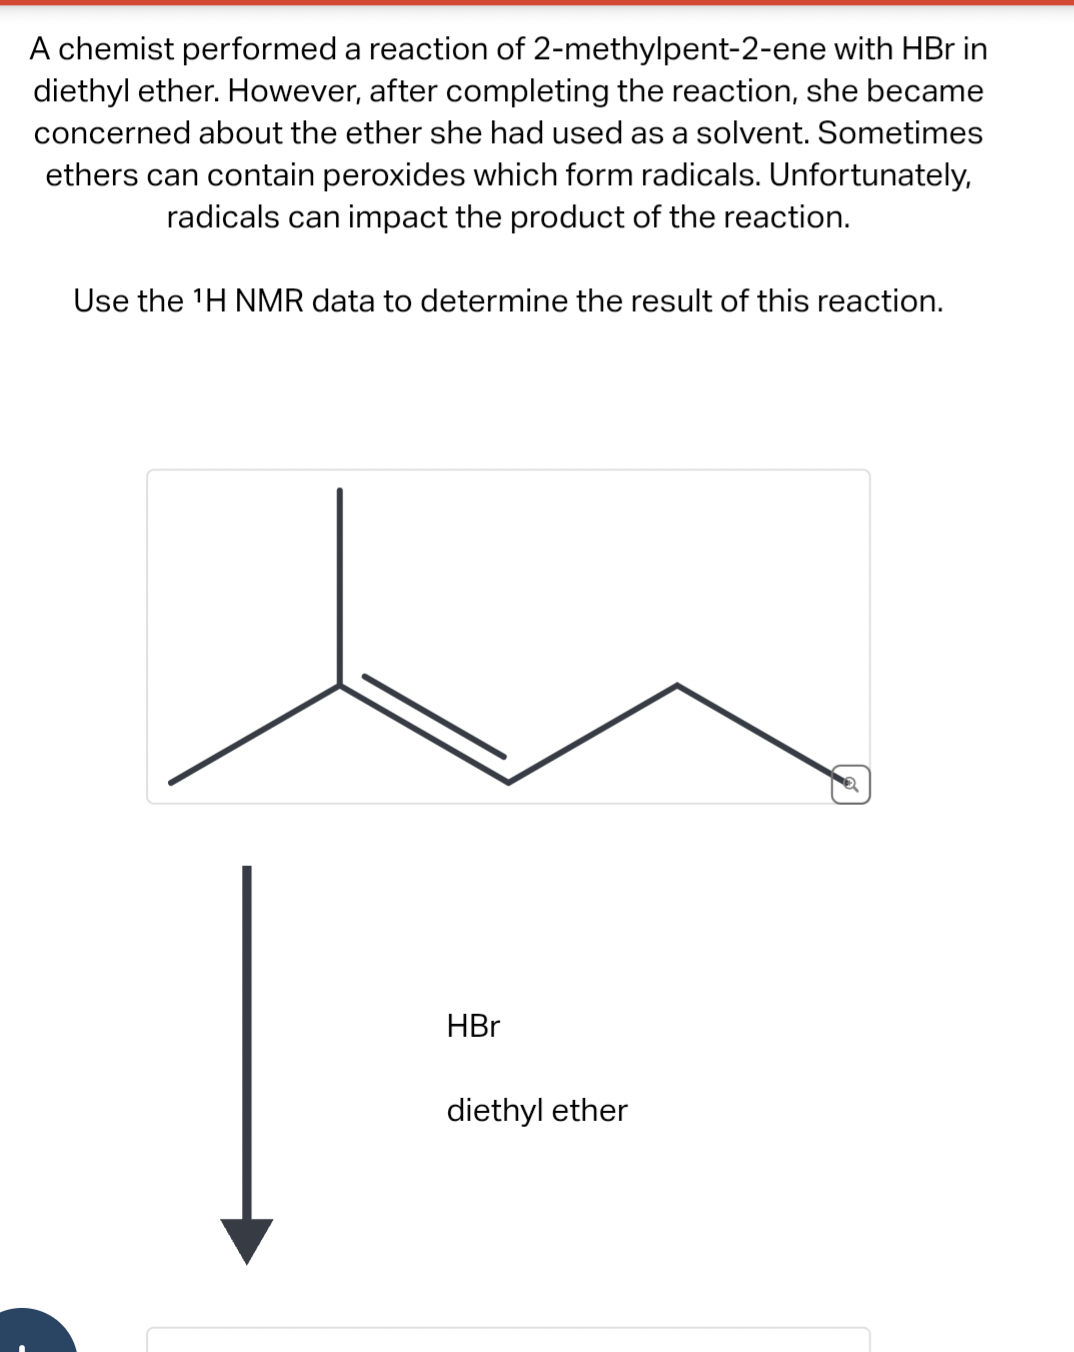 with HBr in
A chemist performed a reaction of 2-methylpent-2-ene
diethyl ether. However, after completing the reaction, she became
concerned about the ether she had used as a solvent. Sometimes
ethers can contain peroxides which form radicals. Unfortunately,
radicals can impact the product of the reaction.
Use the ¹H NMR data to determine the result of this reaction.
HBr
diethyl ether
2